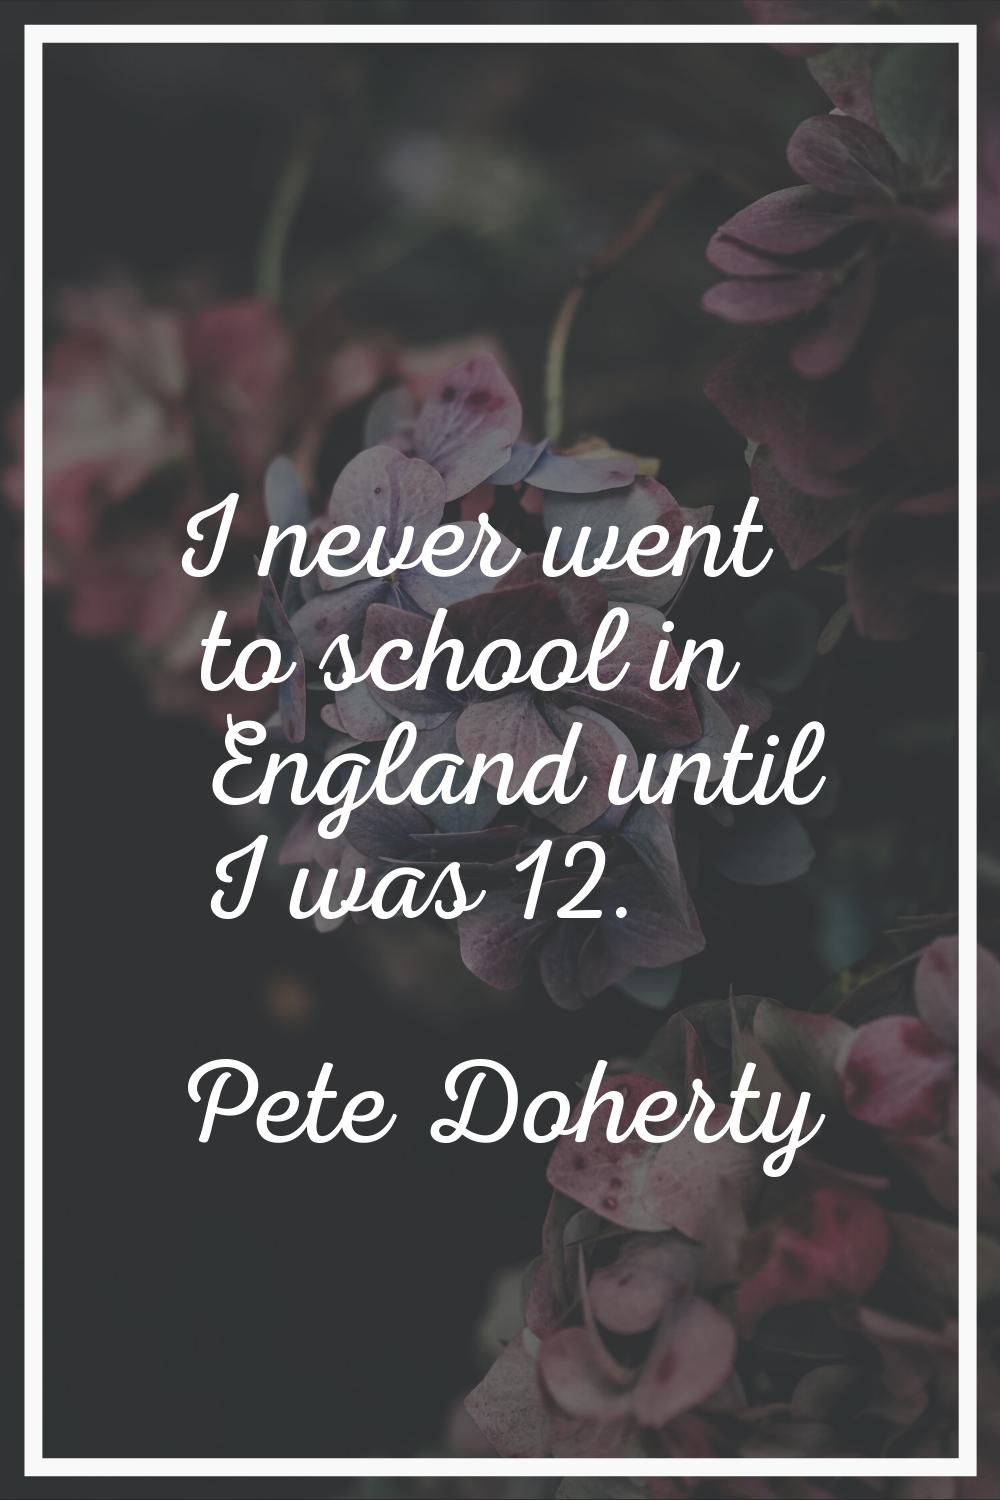 I never went to school in England until I was 12.